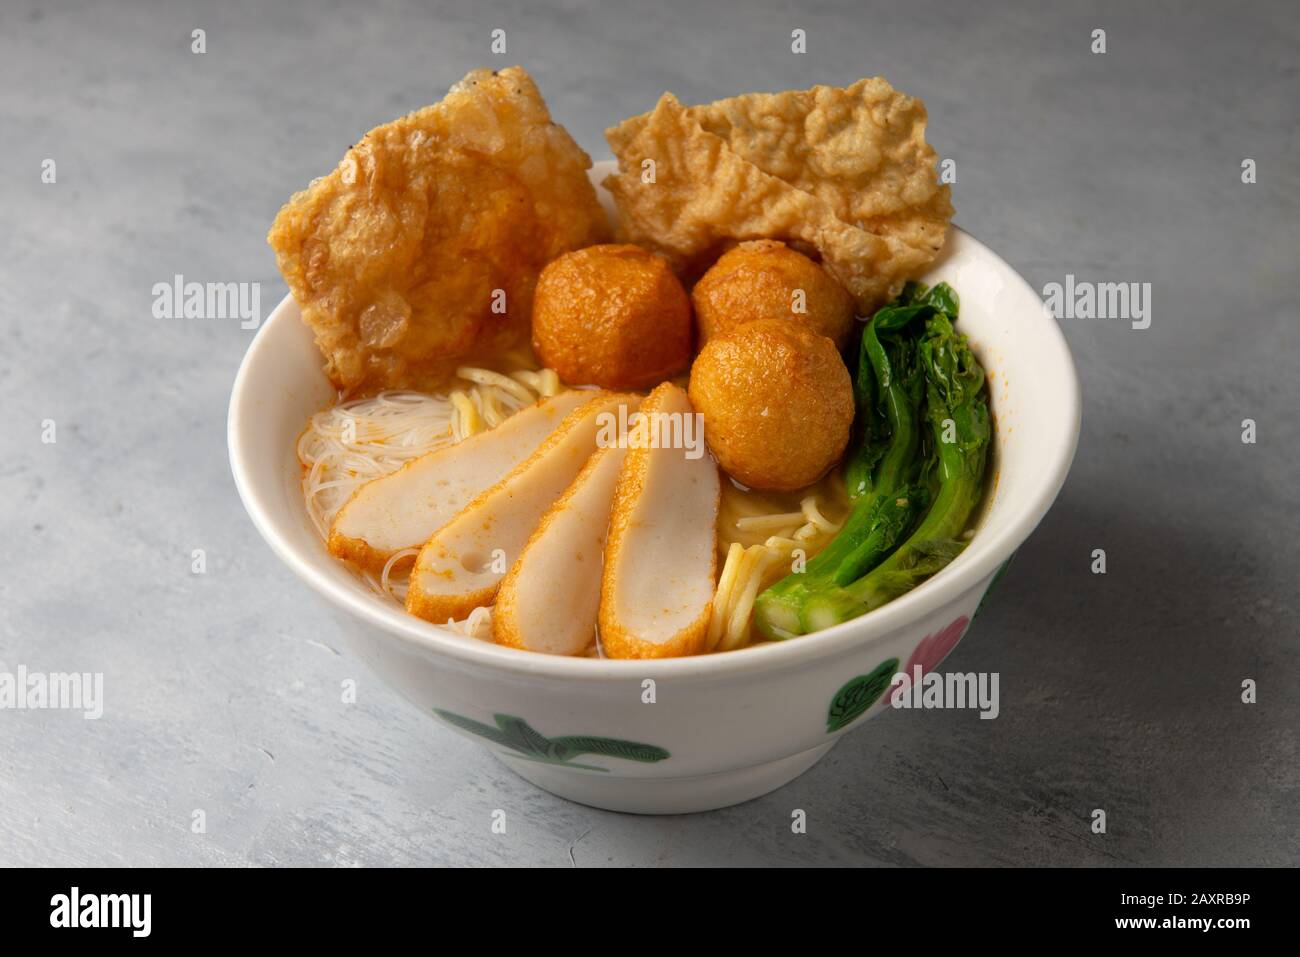 keow teow soup with fishballs and fishcakes chinese style with background Stock Photo